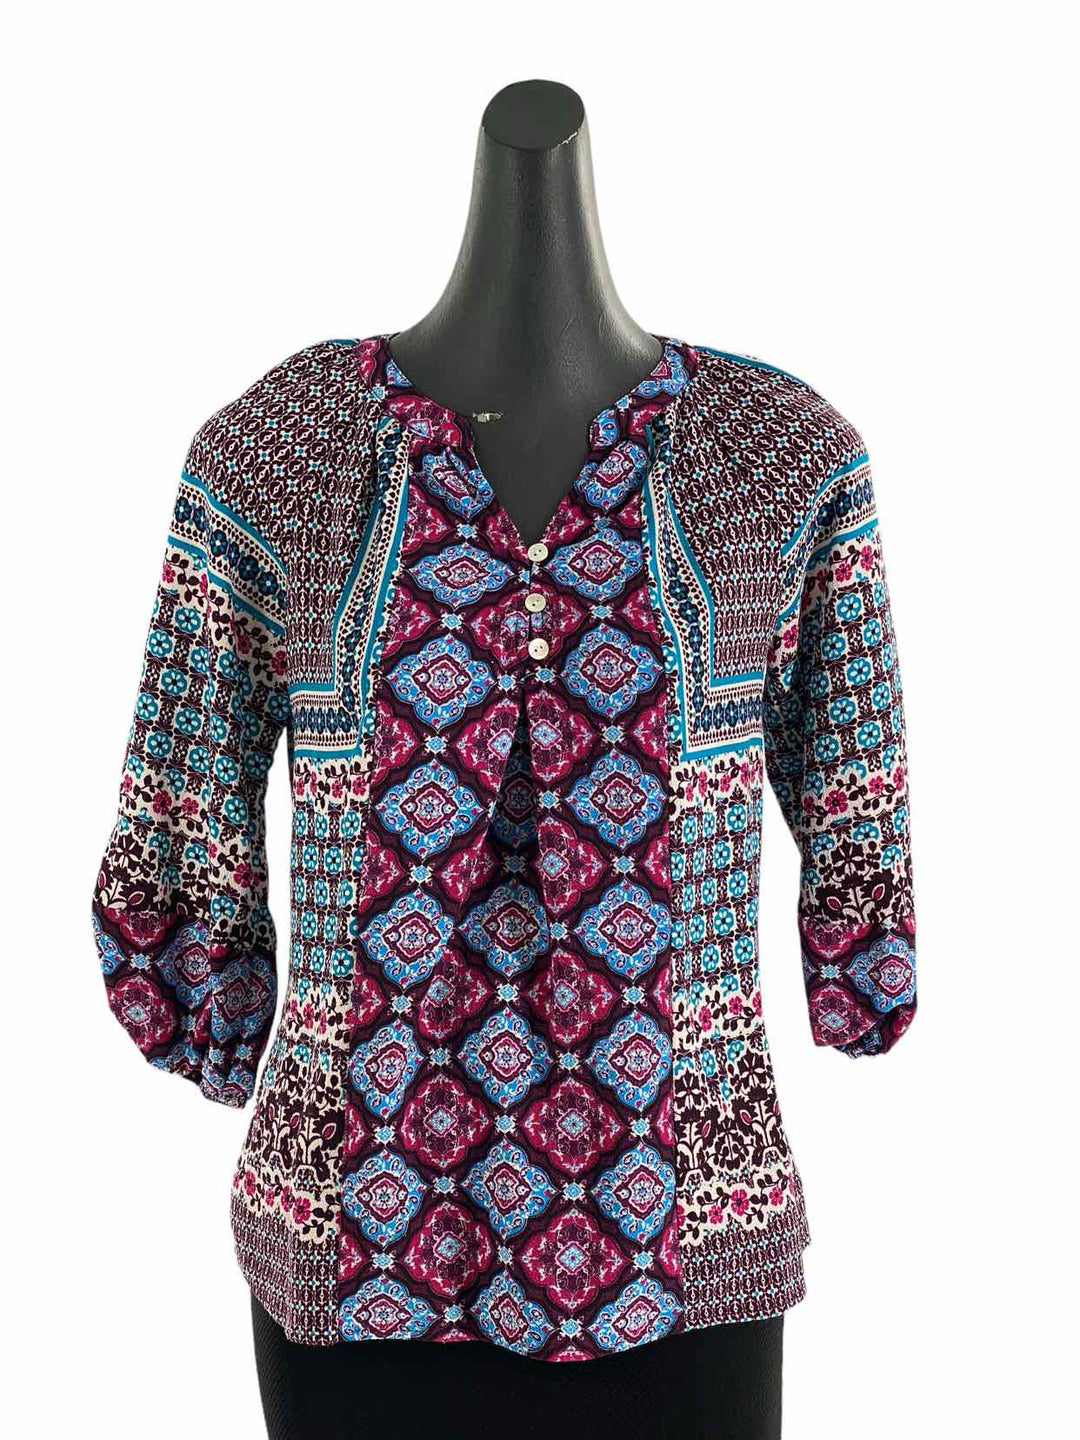 No Brand Size S Multi-Color print Long Sleeve Shirts